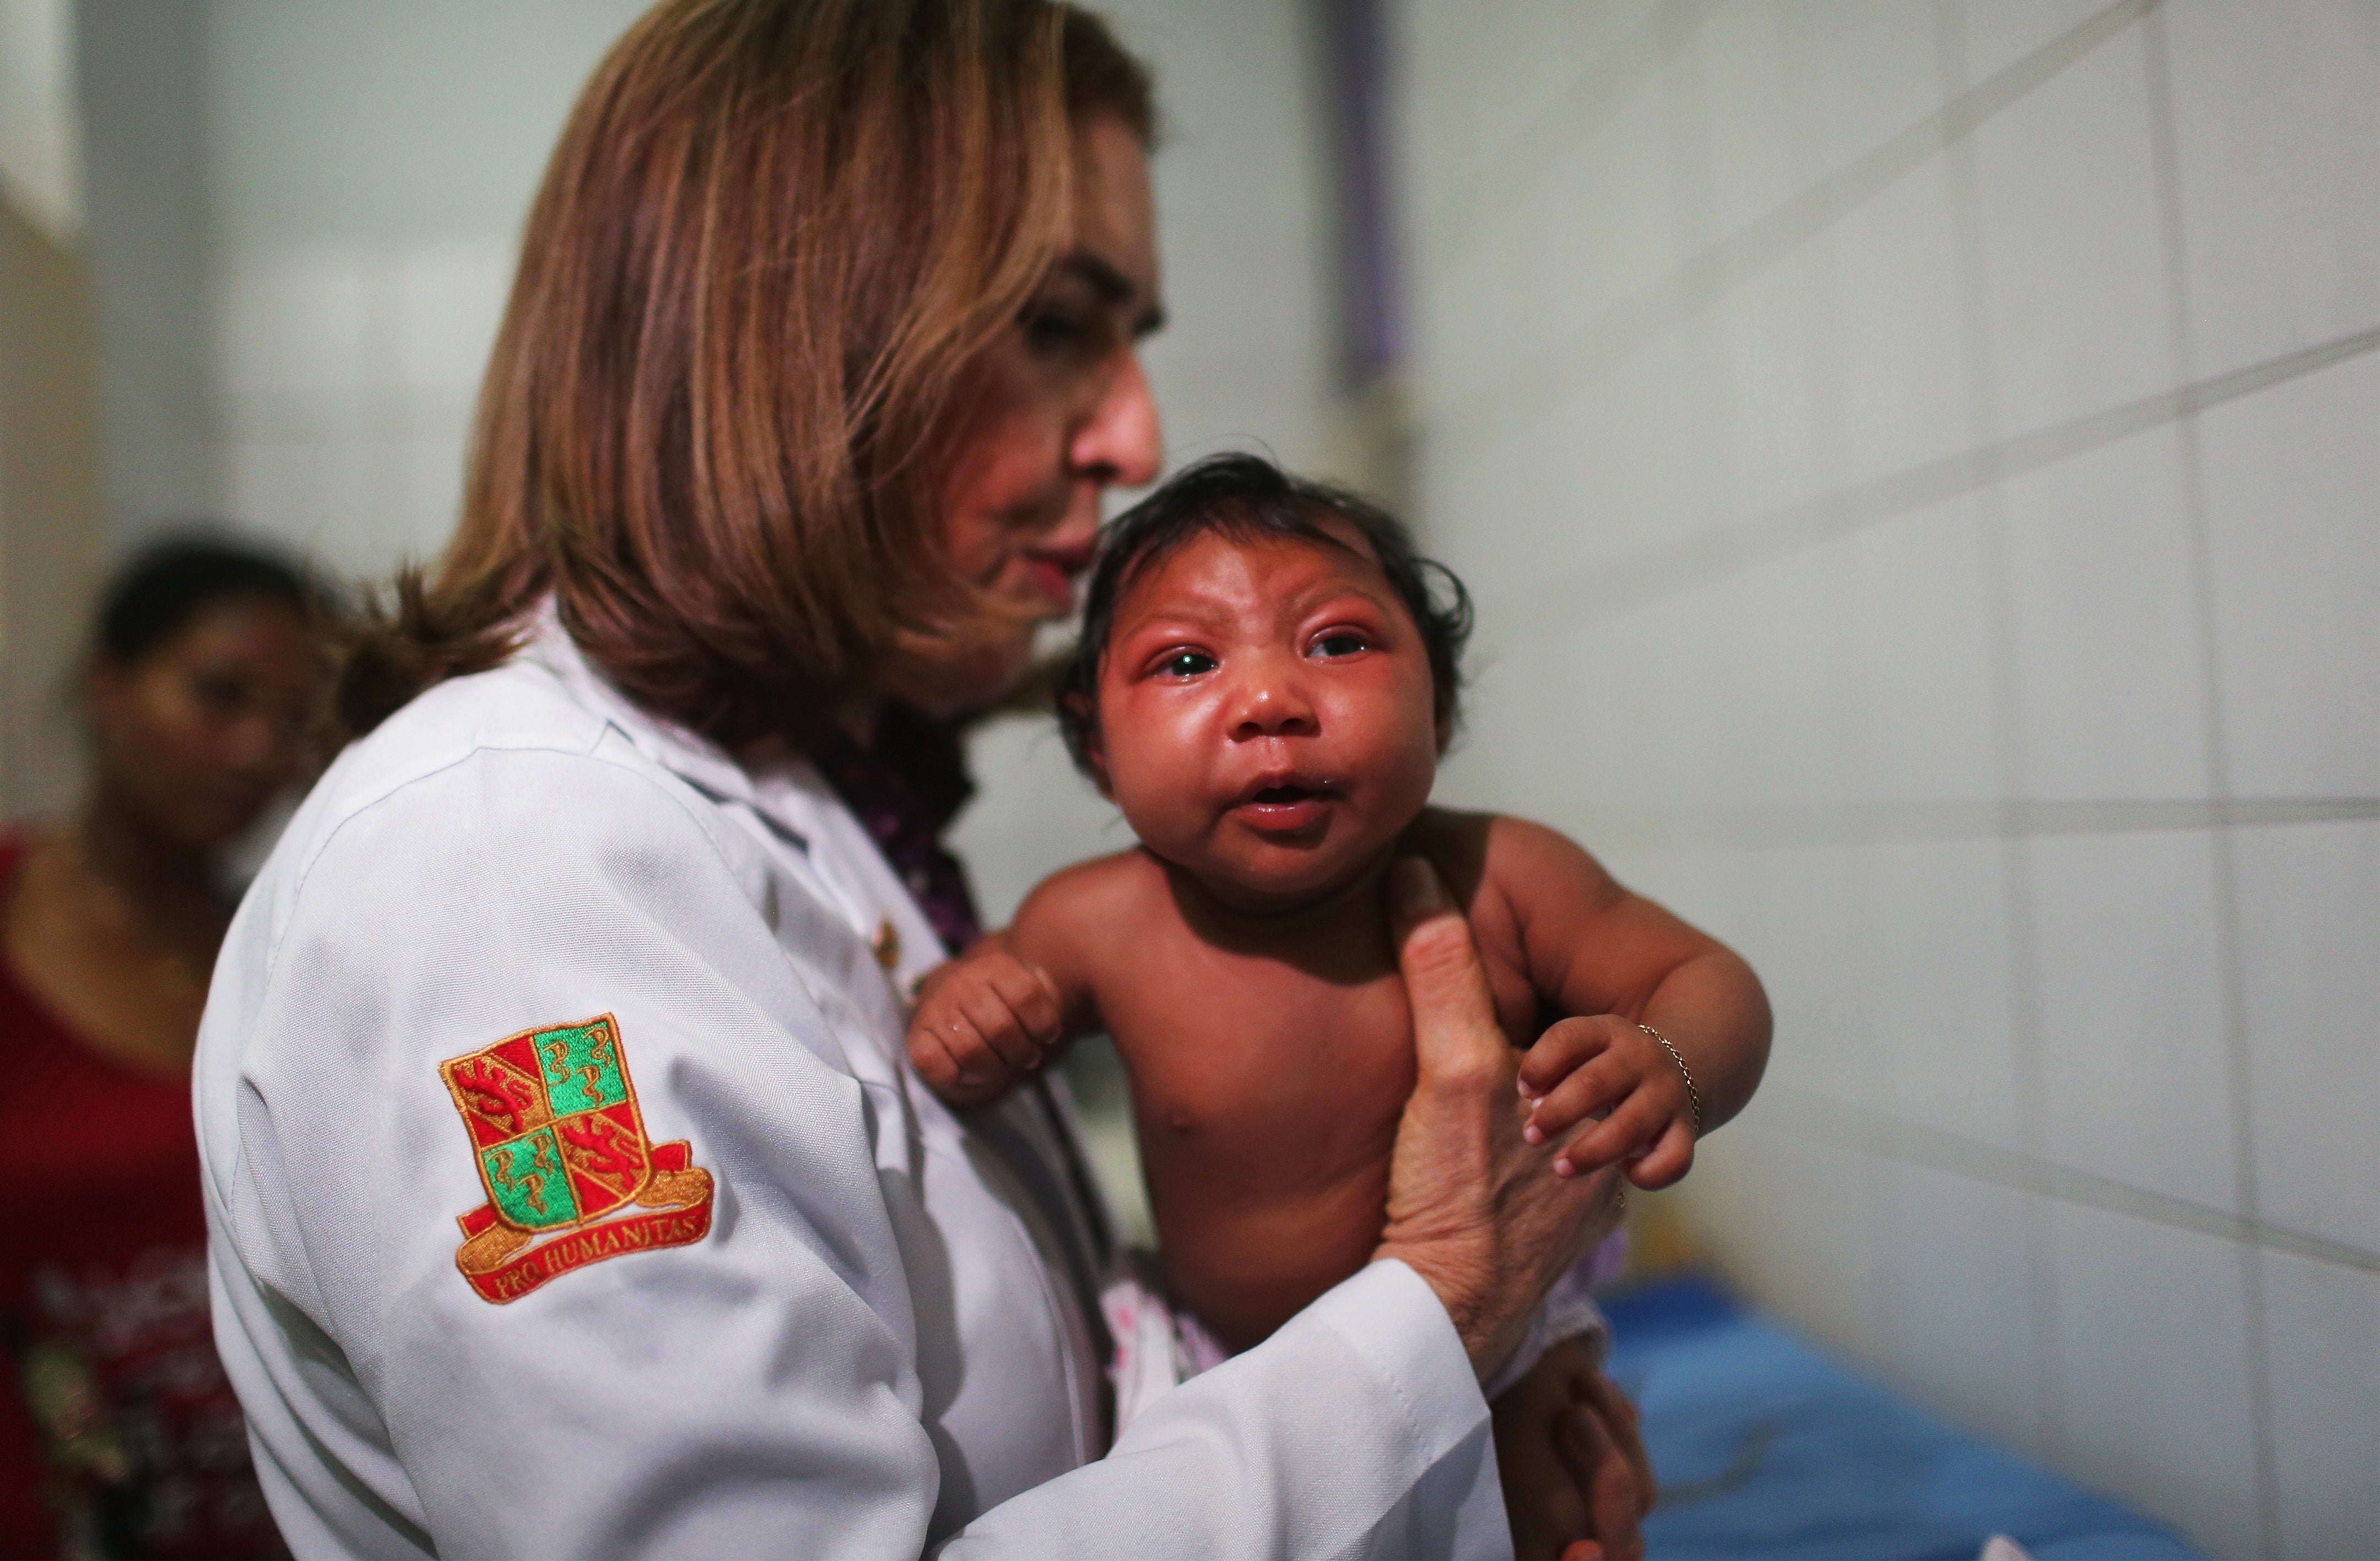 &#13;
A pediatric infectologist examines a two-months-old baby, who has microcephaly, on 26 January 2016 in Recife, Brazil. &#13;